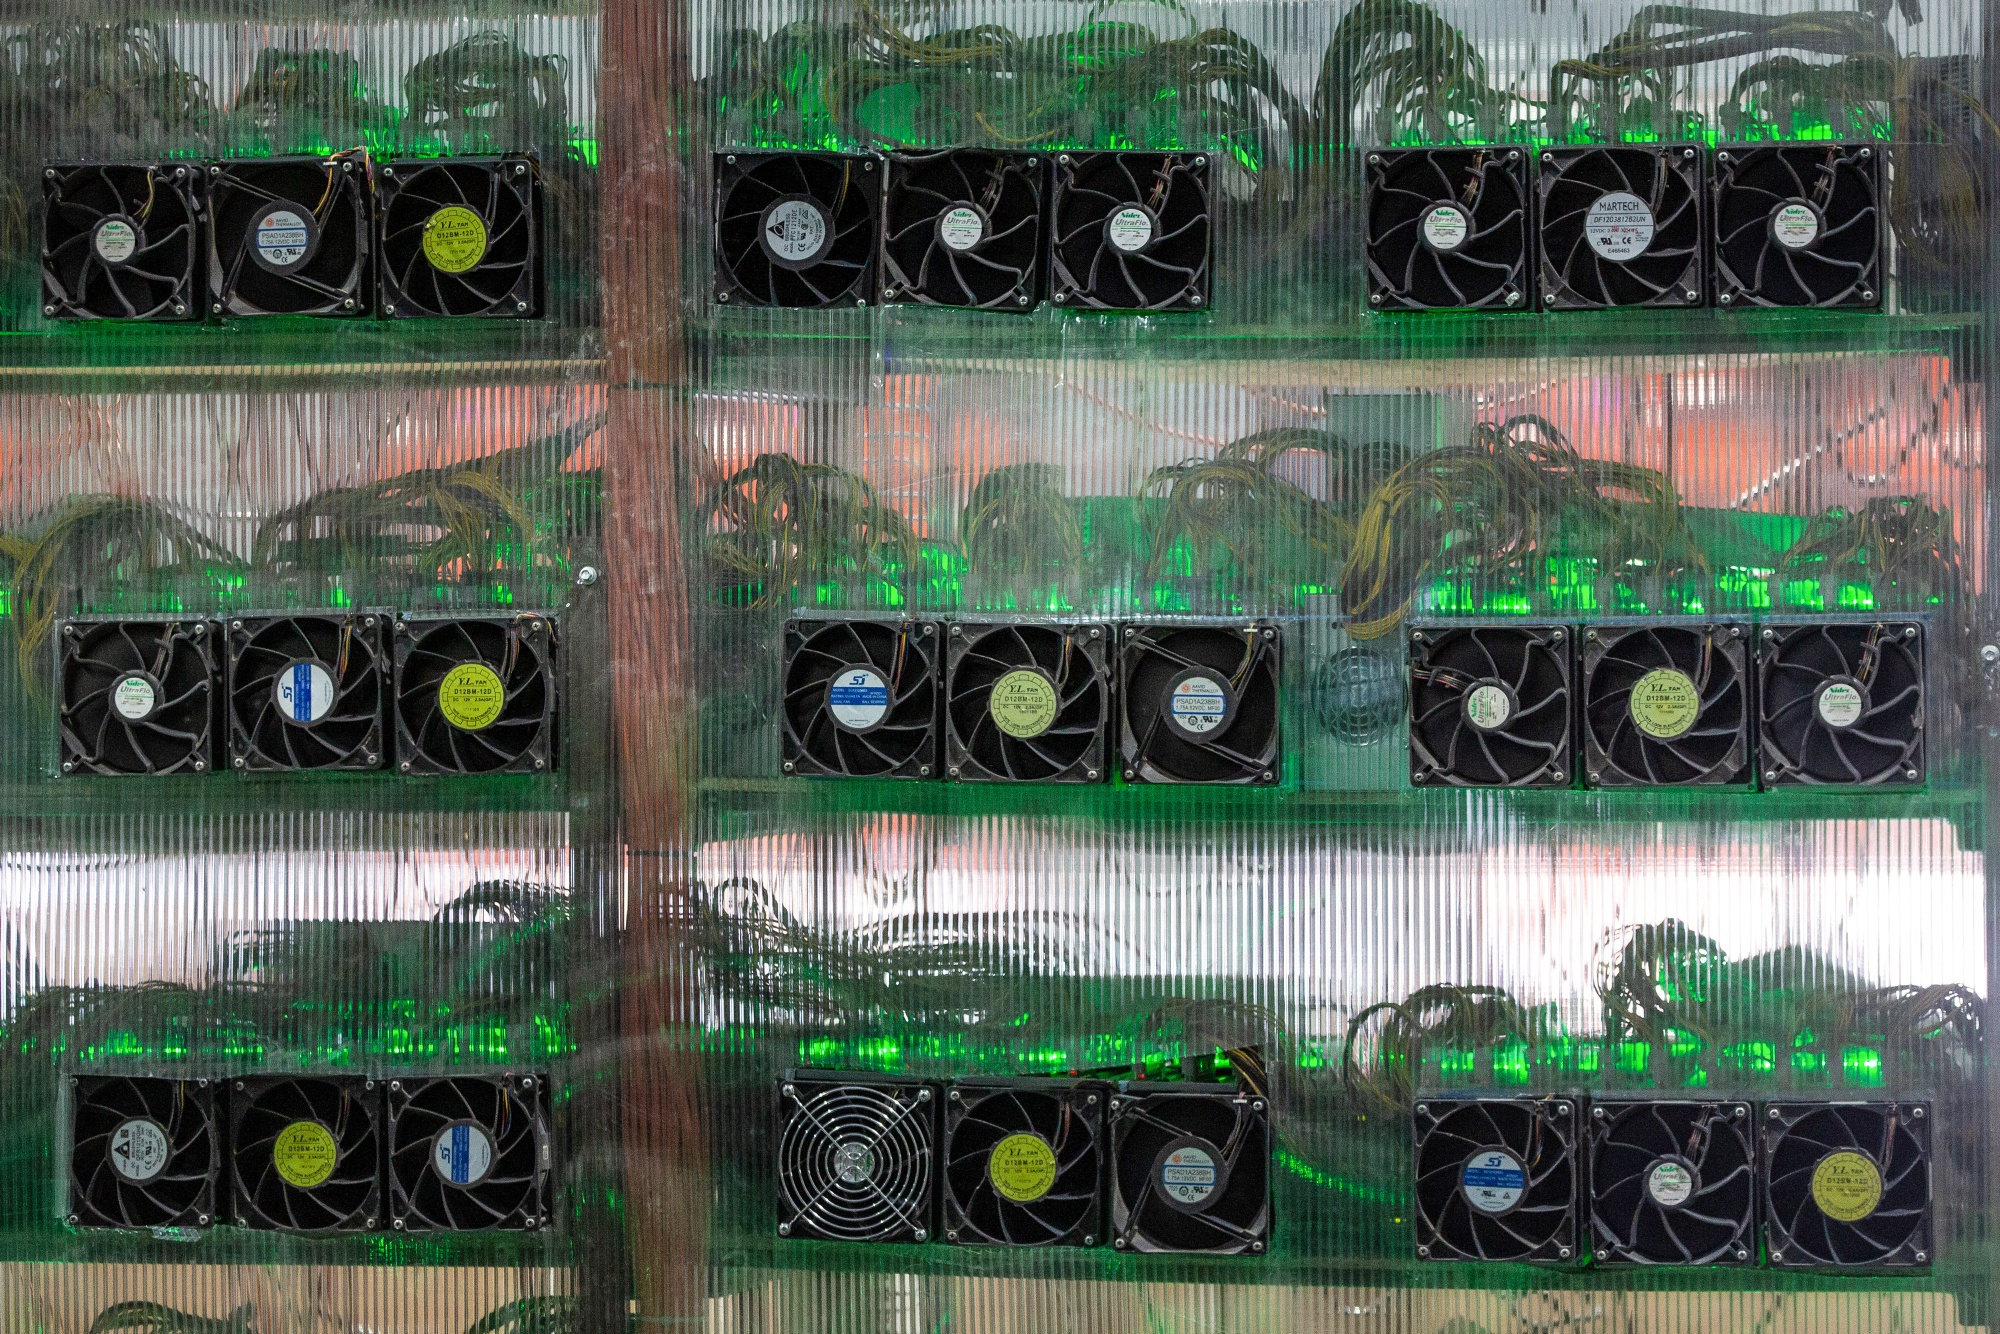 In unexpected twist Bitcoin mining could help wind and solar